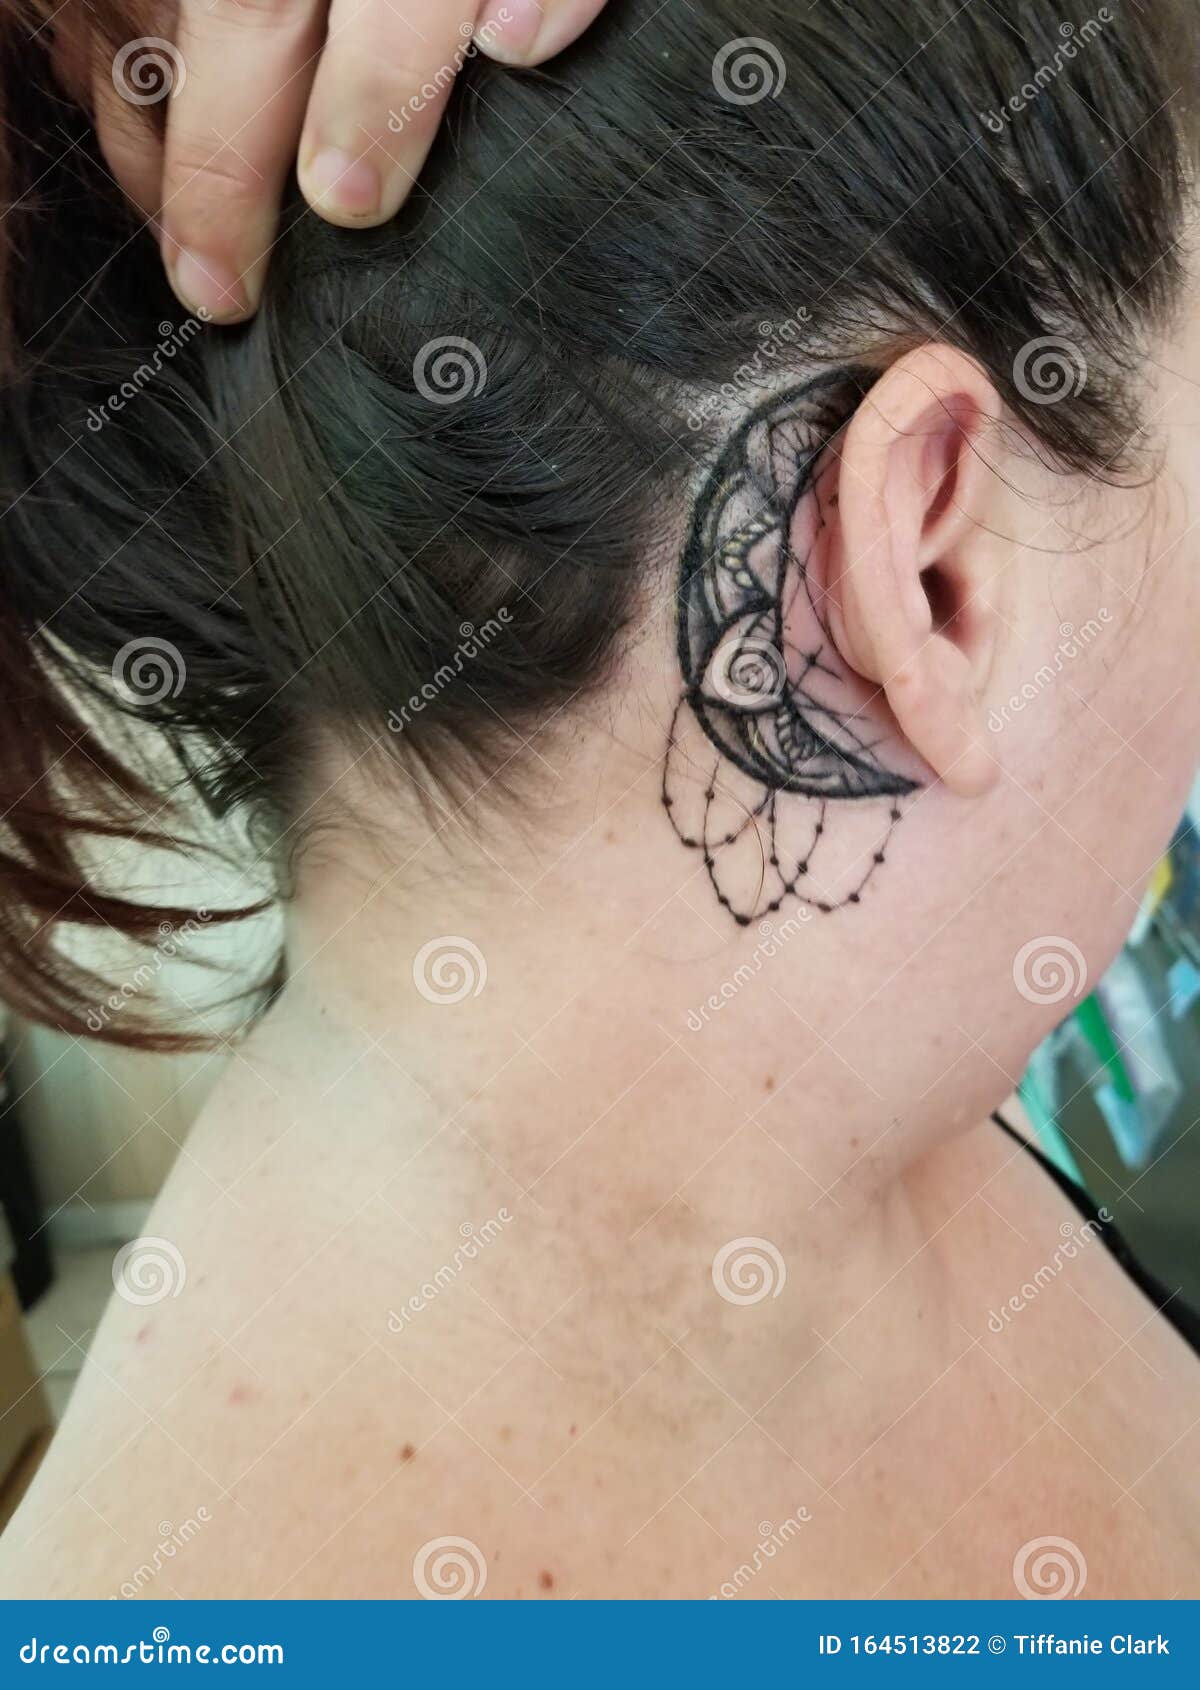 Ear Tattoos ideas Meaning Pain Level Texture and Basic Details